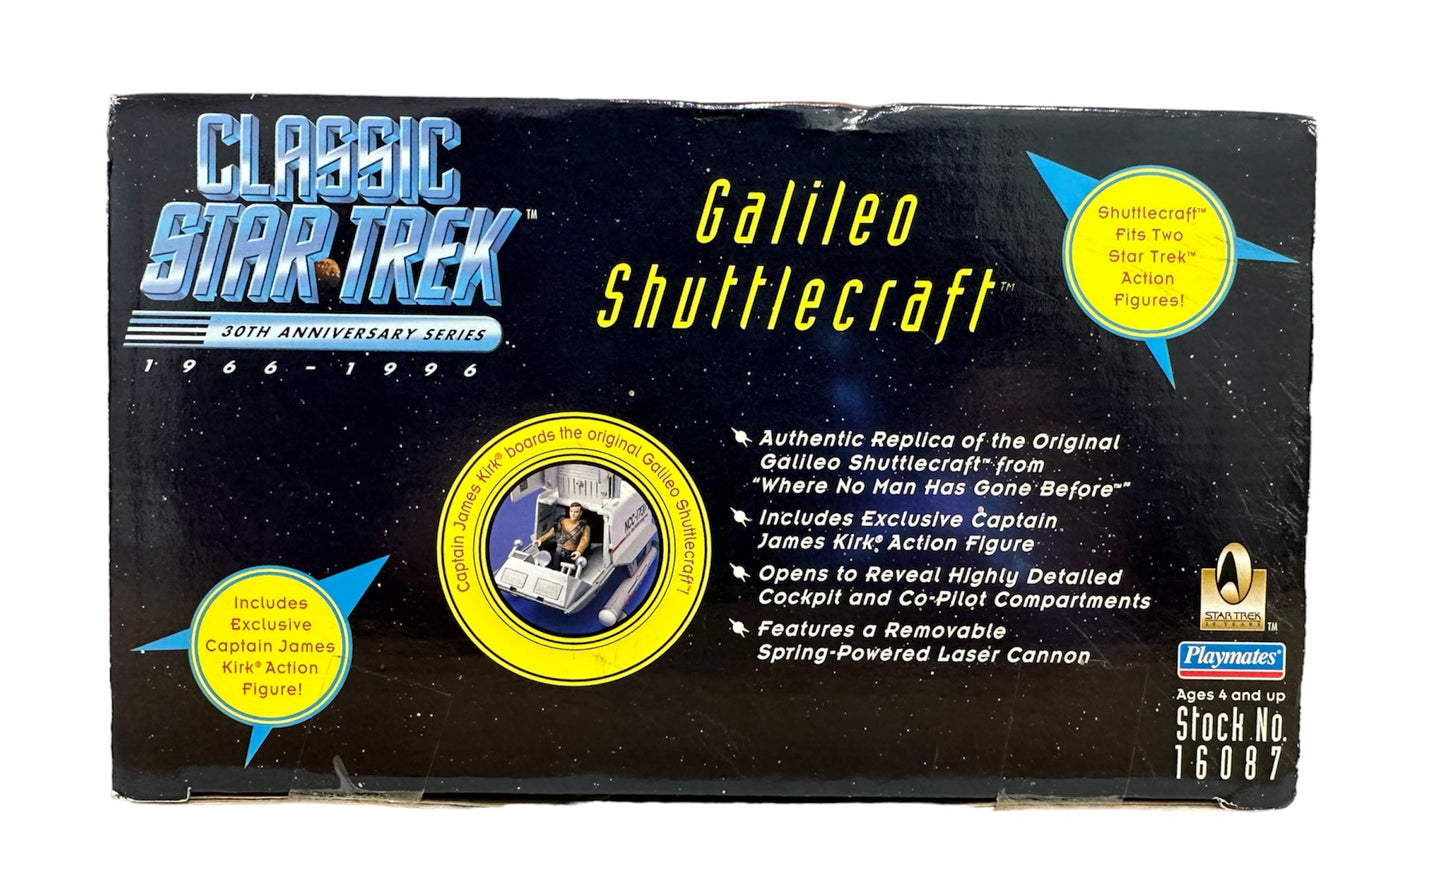 Vintage Playmates 1996 Classic Star 30th Anniversary Trek Galileo Shuttlecraft With Exclusive Captain Kirk Action Figure - Brand New Factory Sealed Shop Stock Room Find